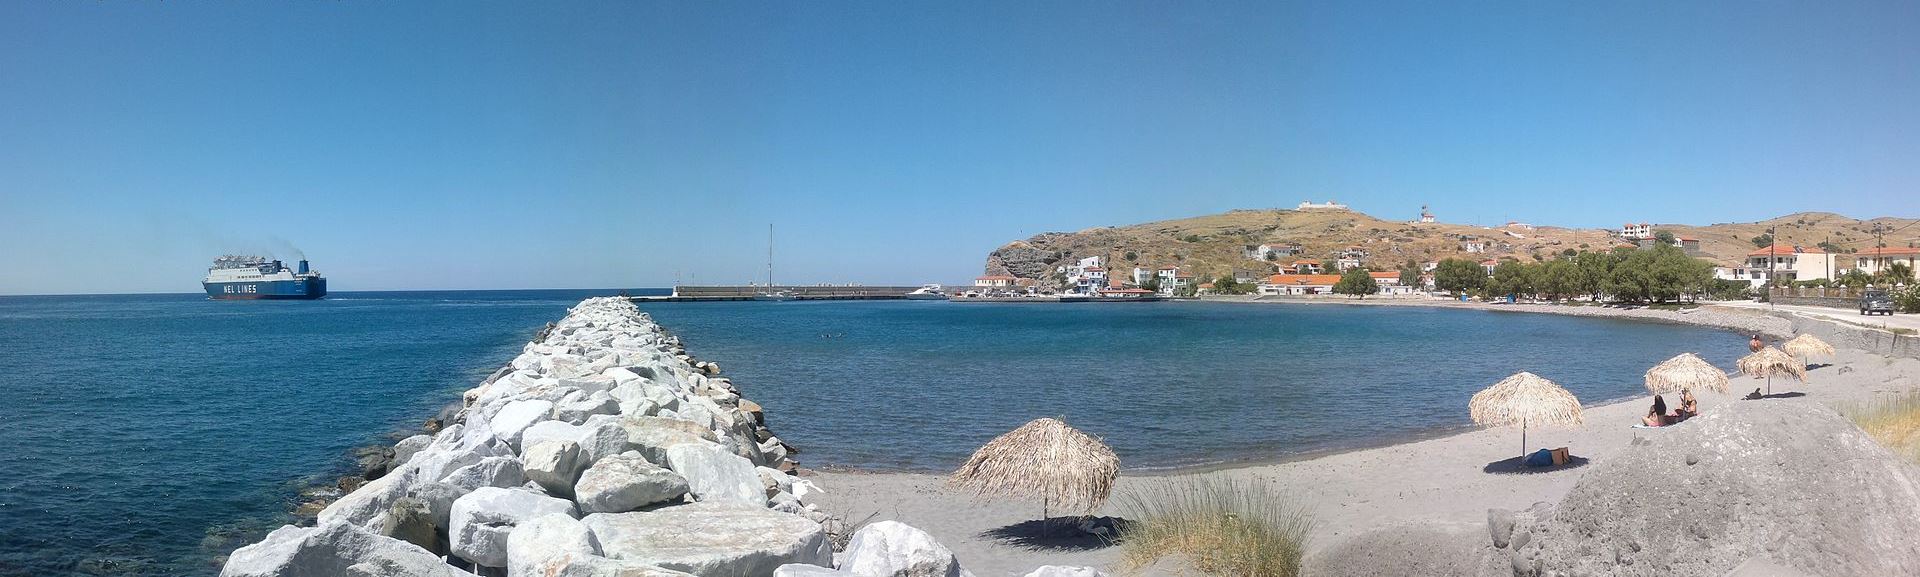 Another view of the harbour of Agios Efstratios